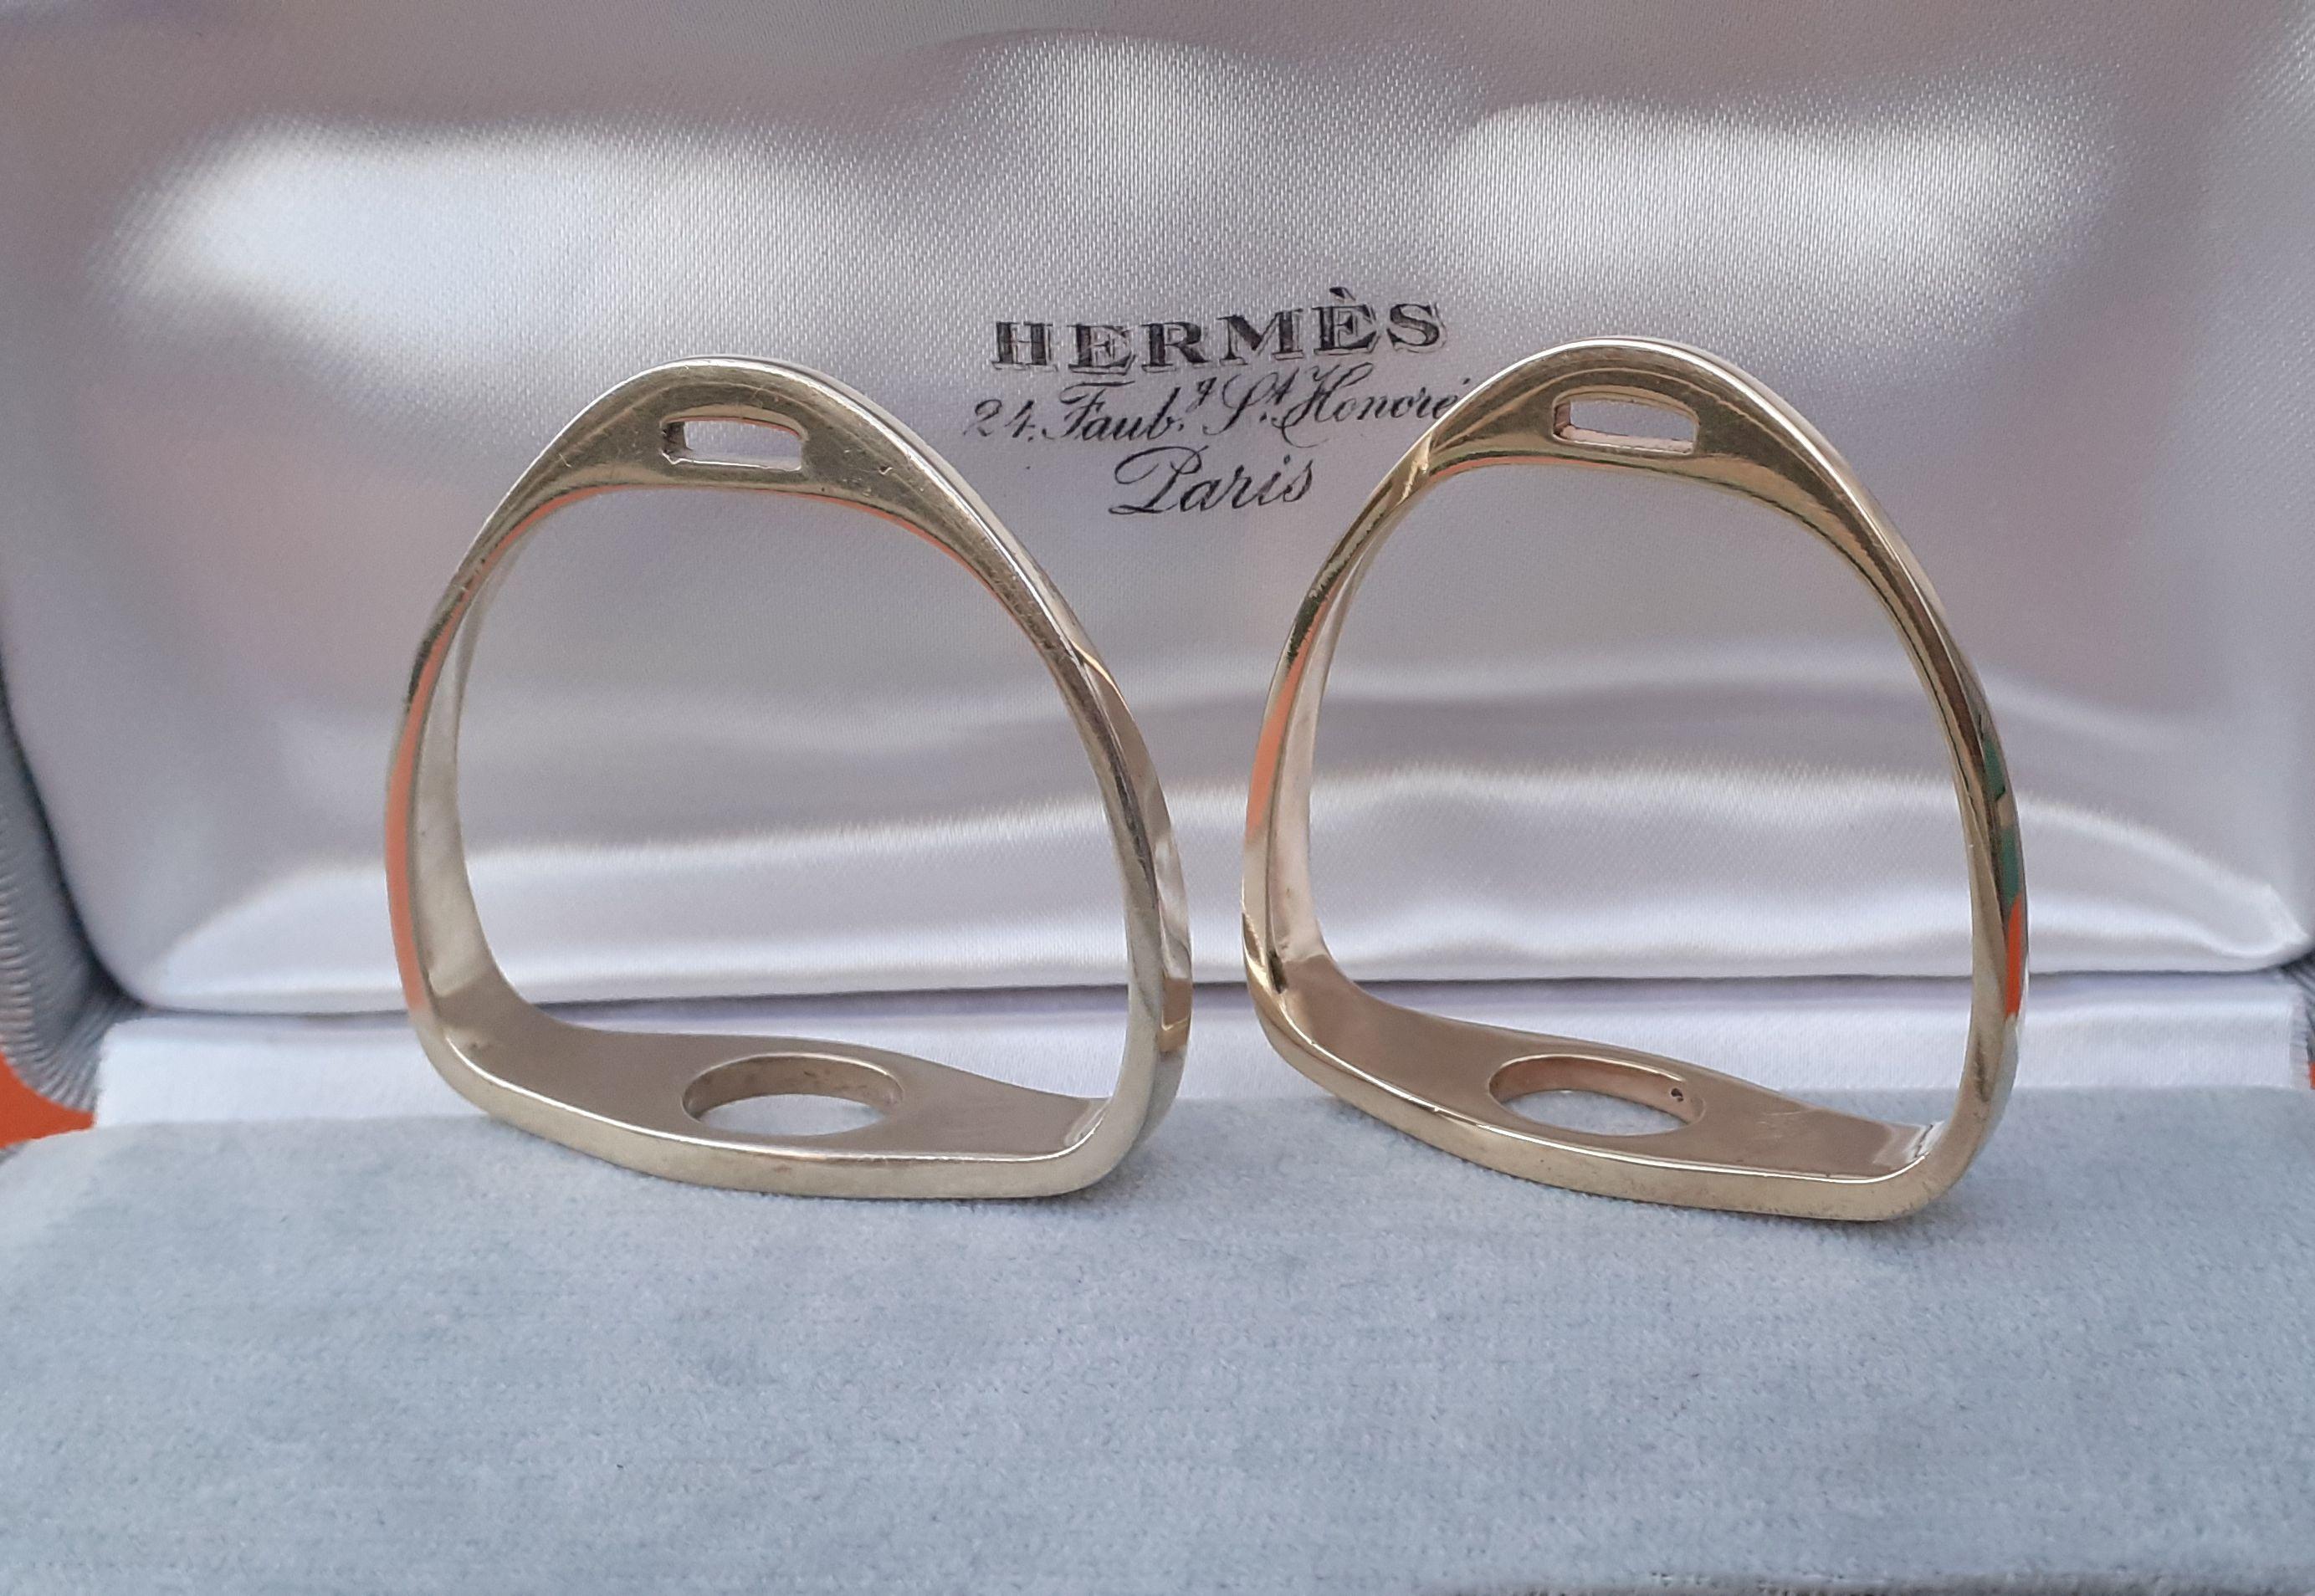 Exceptional Hermès Set of 2 Napkin Rings Stirrups Shaped in Silver-Gilt Texas For Sale 9